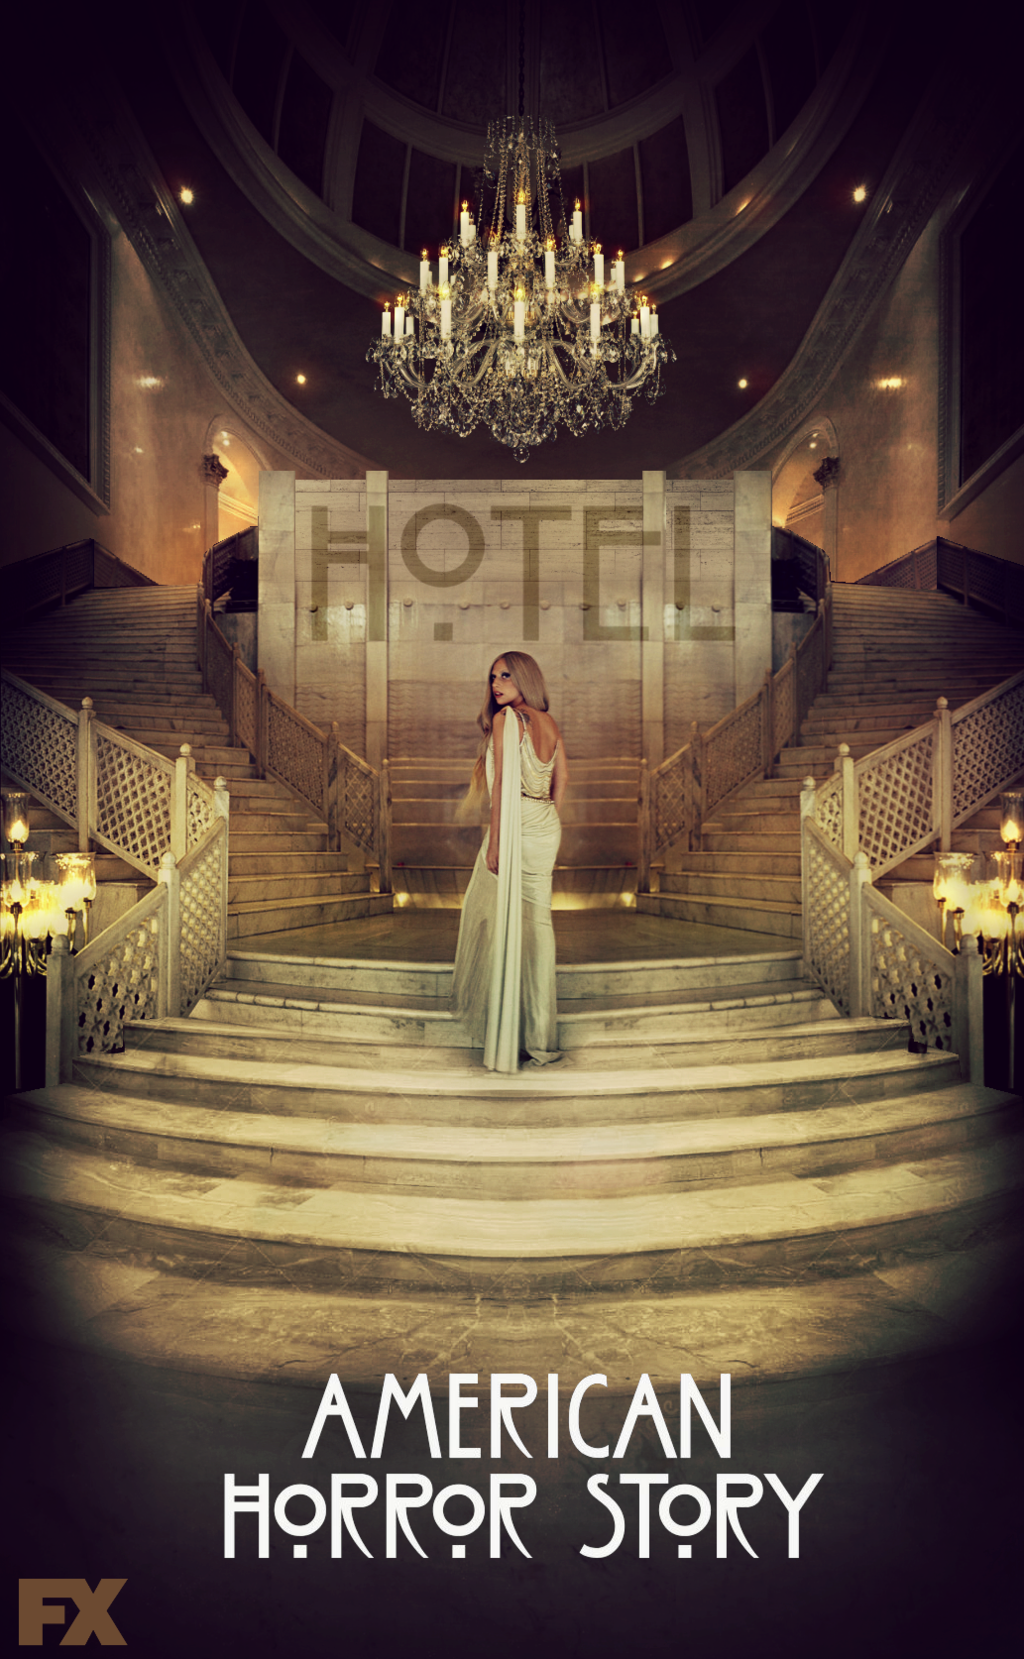 Free download American Horror Story Hotel Lady Gaga by Panchecco [1024x1659] for your Desktop, Mobile & Tablet. Explore AHS Hotel Wallpaper. American Horror Story Hotel Wallpaper, American Horror Story